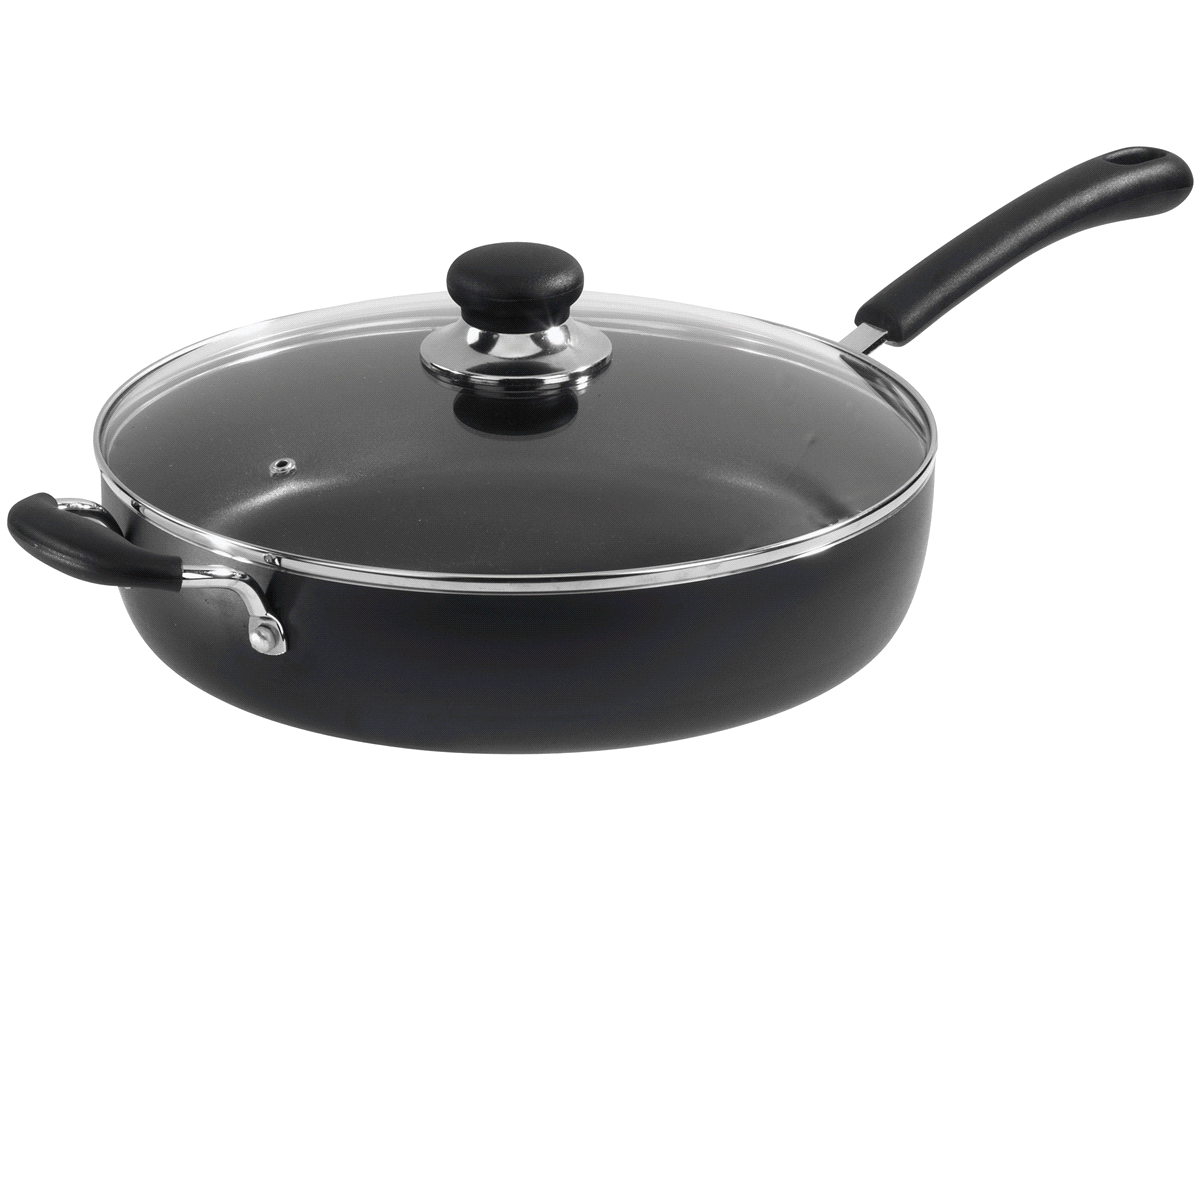 slide 1 of 1, T-fal Specialty Nonstick Jumbo Cooker Cookware with Glass Lid, Black, 5 qt